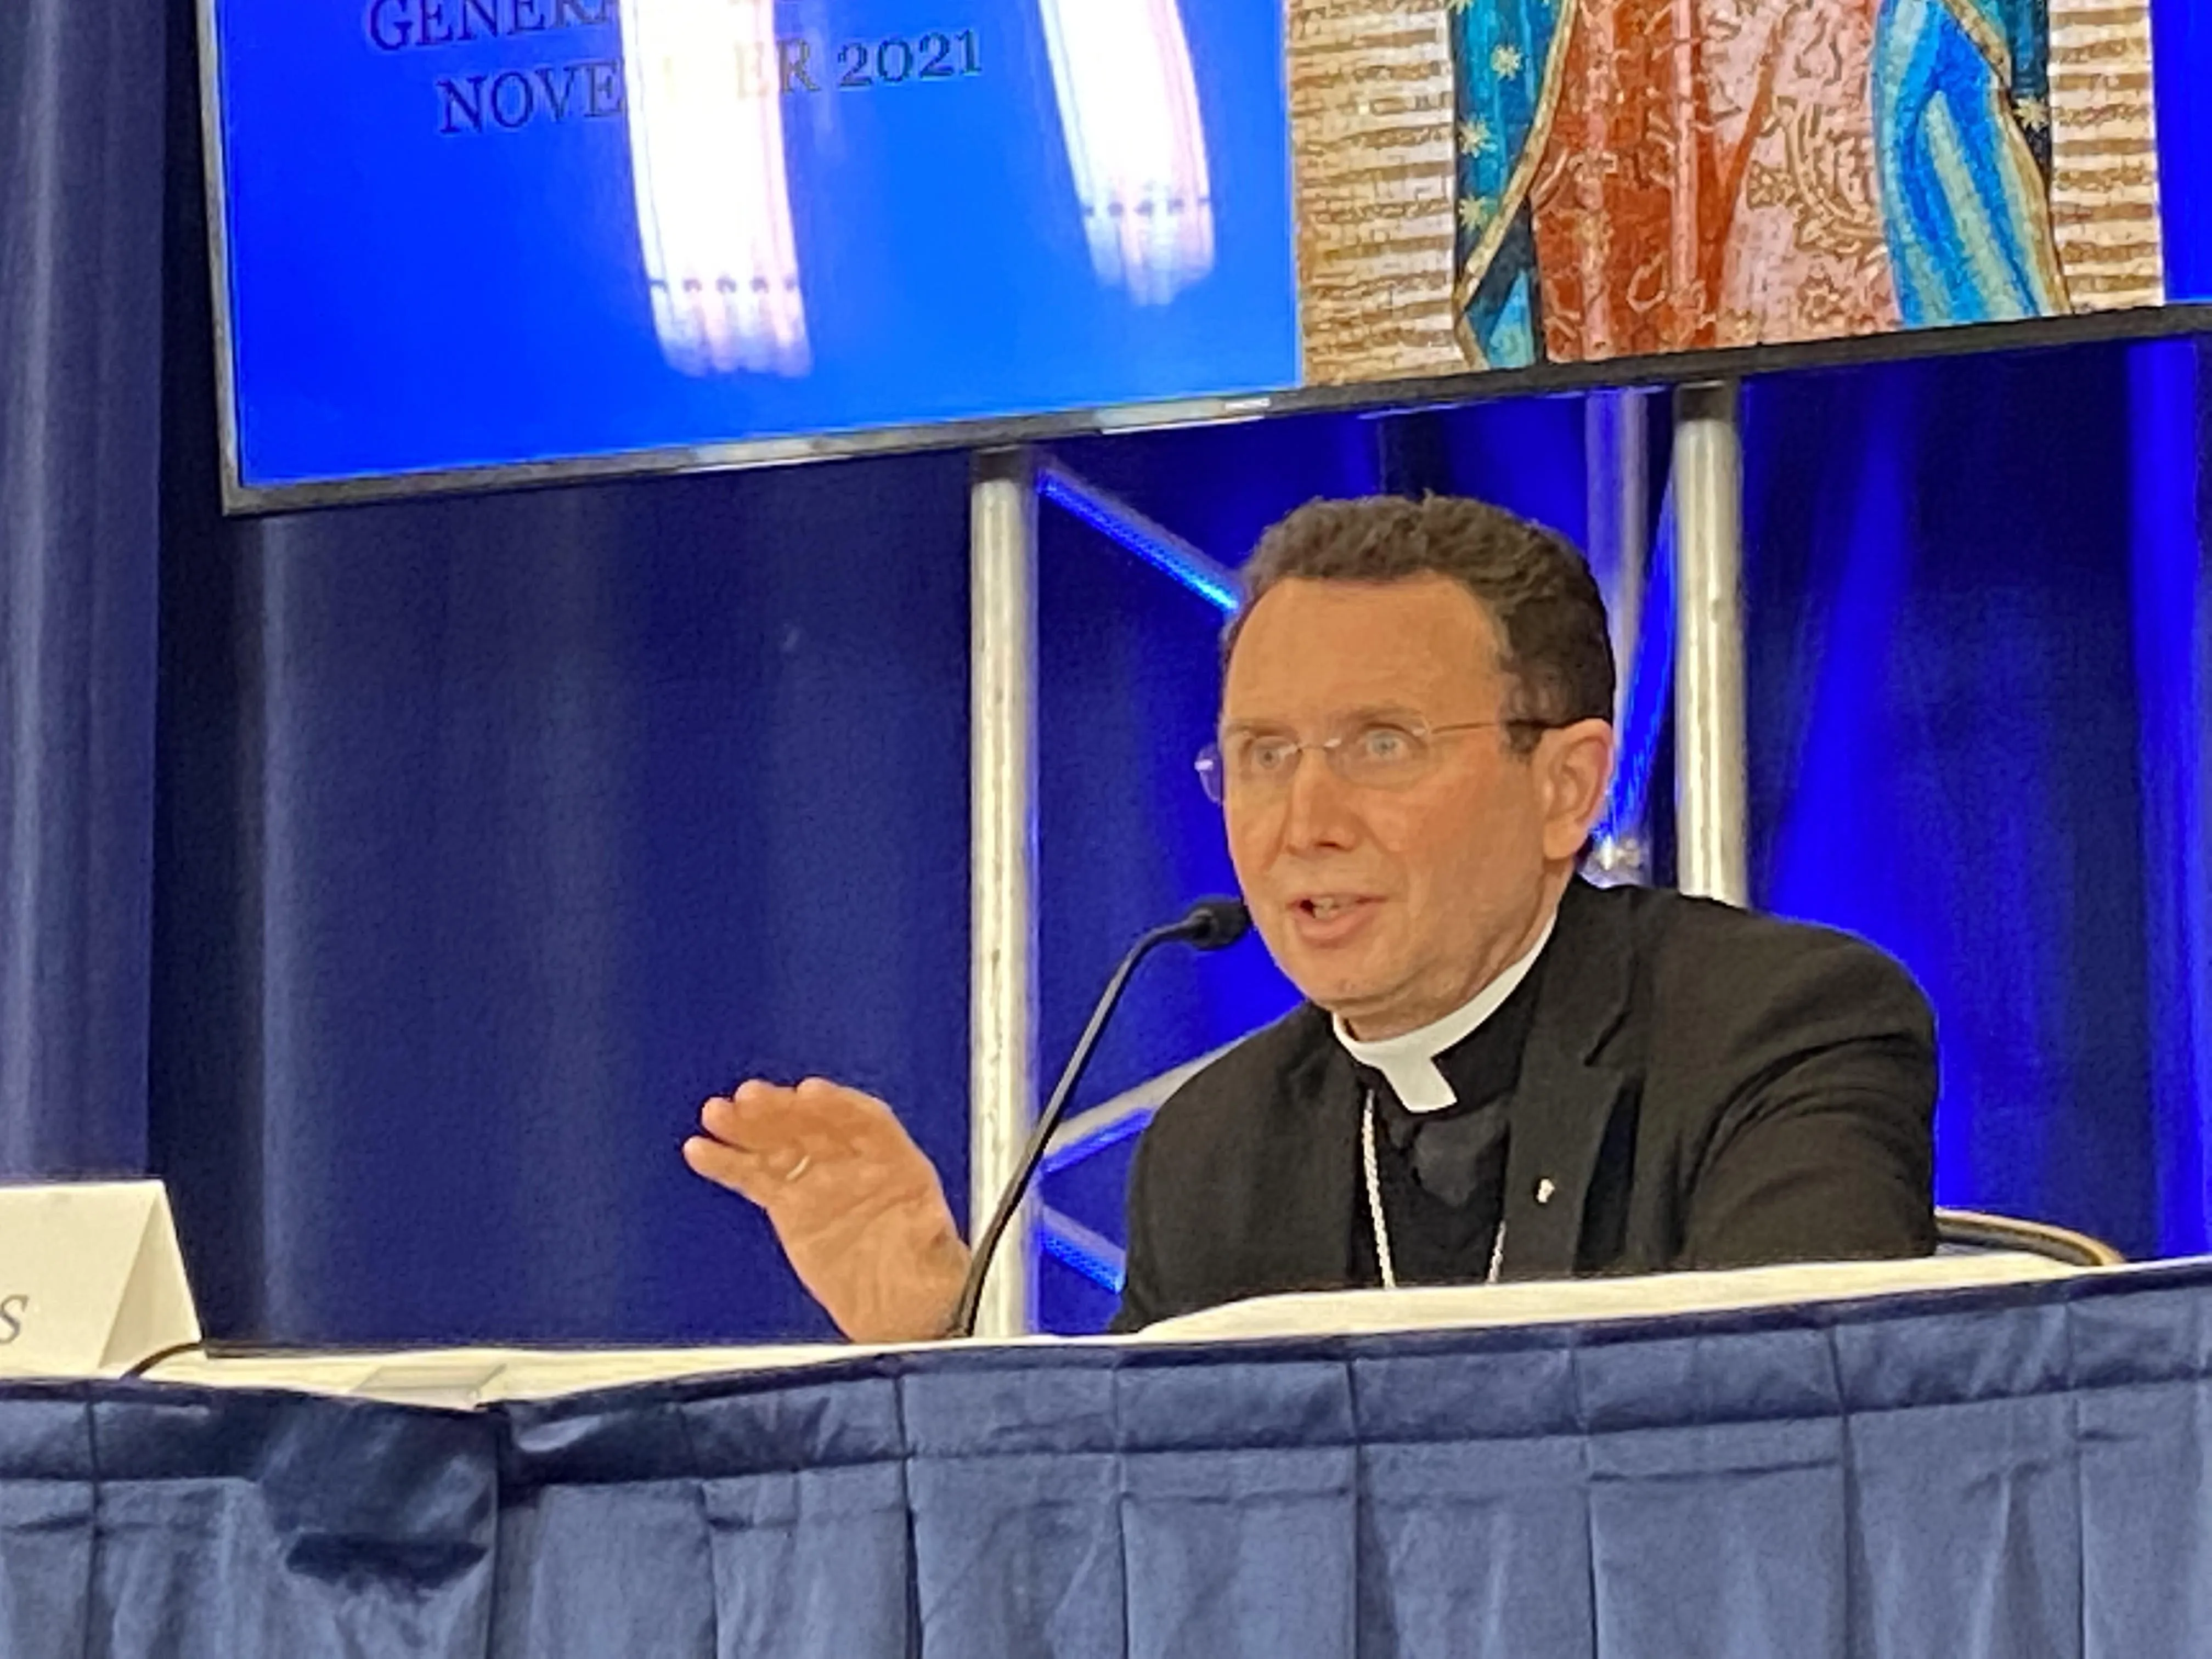 Bishop-designate Andrew Cozzens of Crookston, Minn. speaking Nov. 16 during the United States Conference of Catholic Bishops Fall Assembly in Baltimore.?w=200&h=150